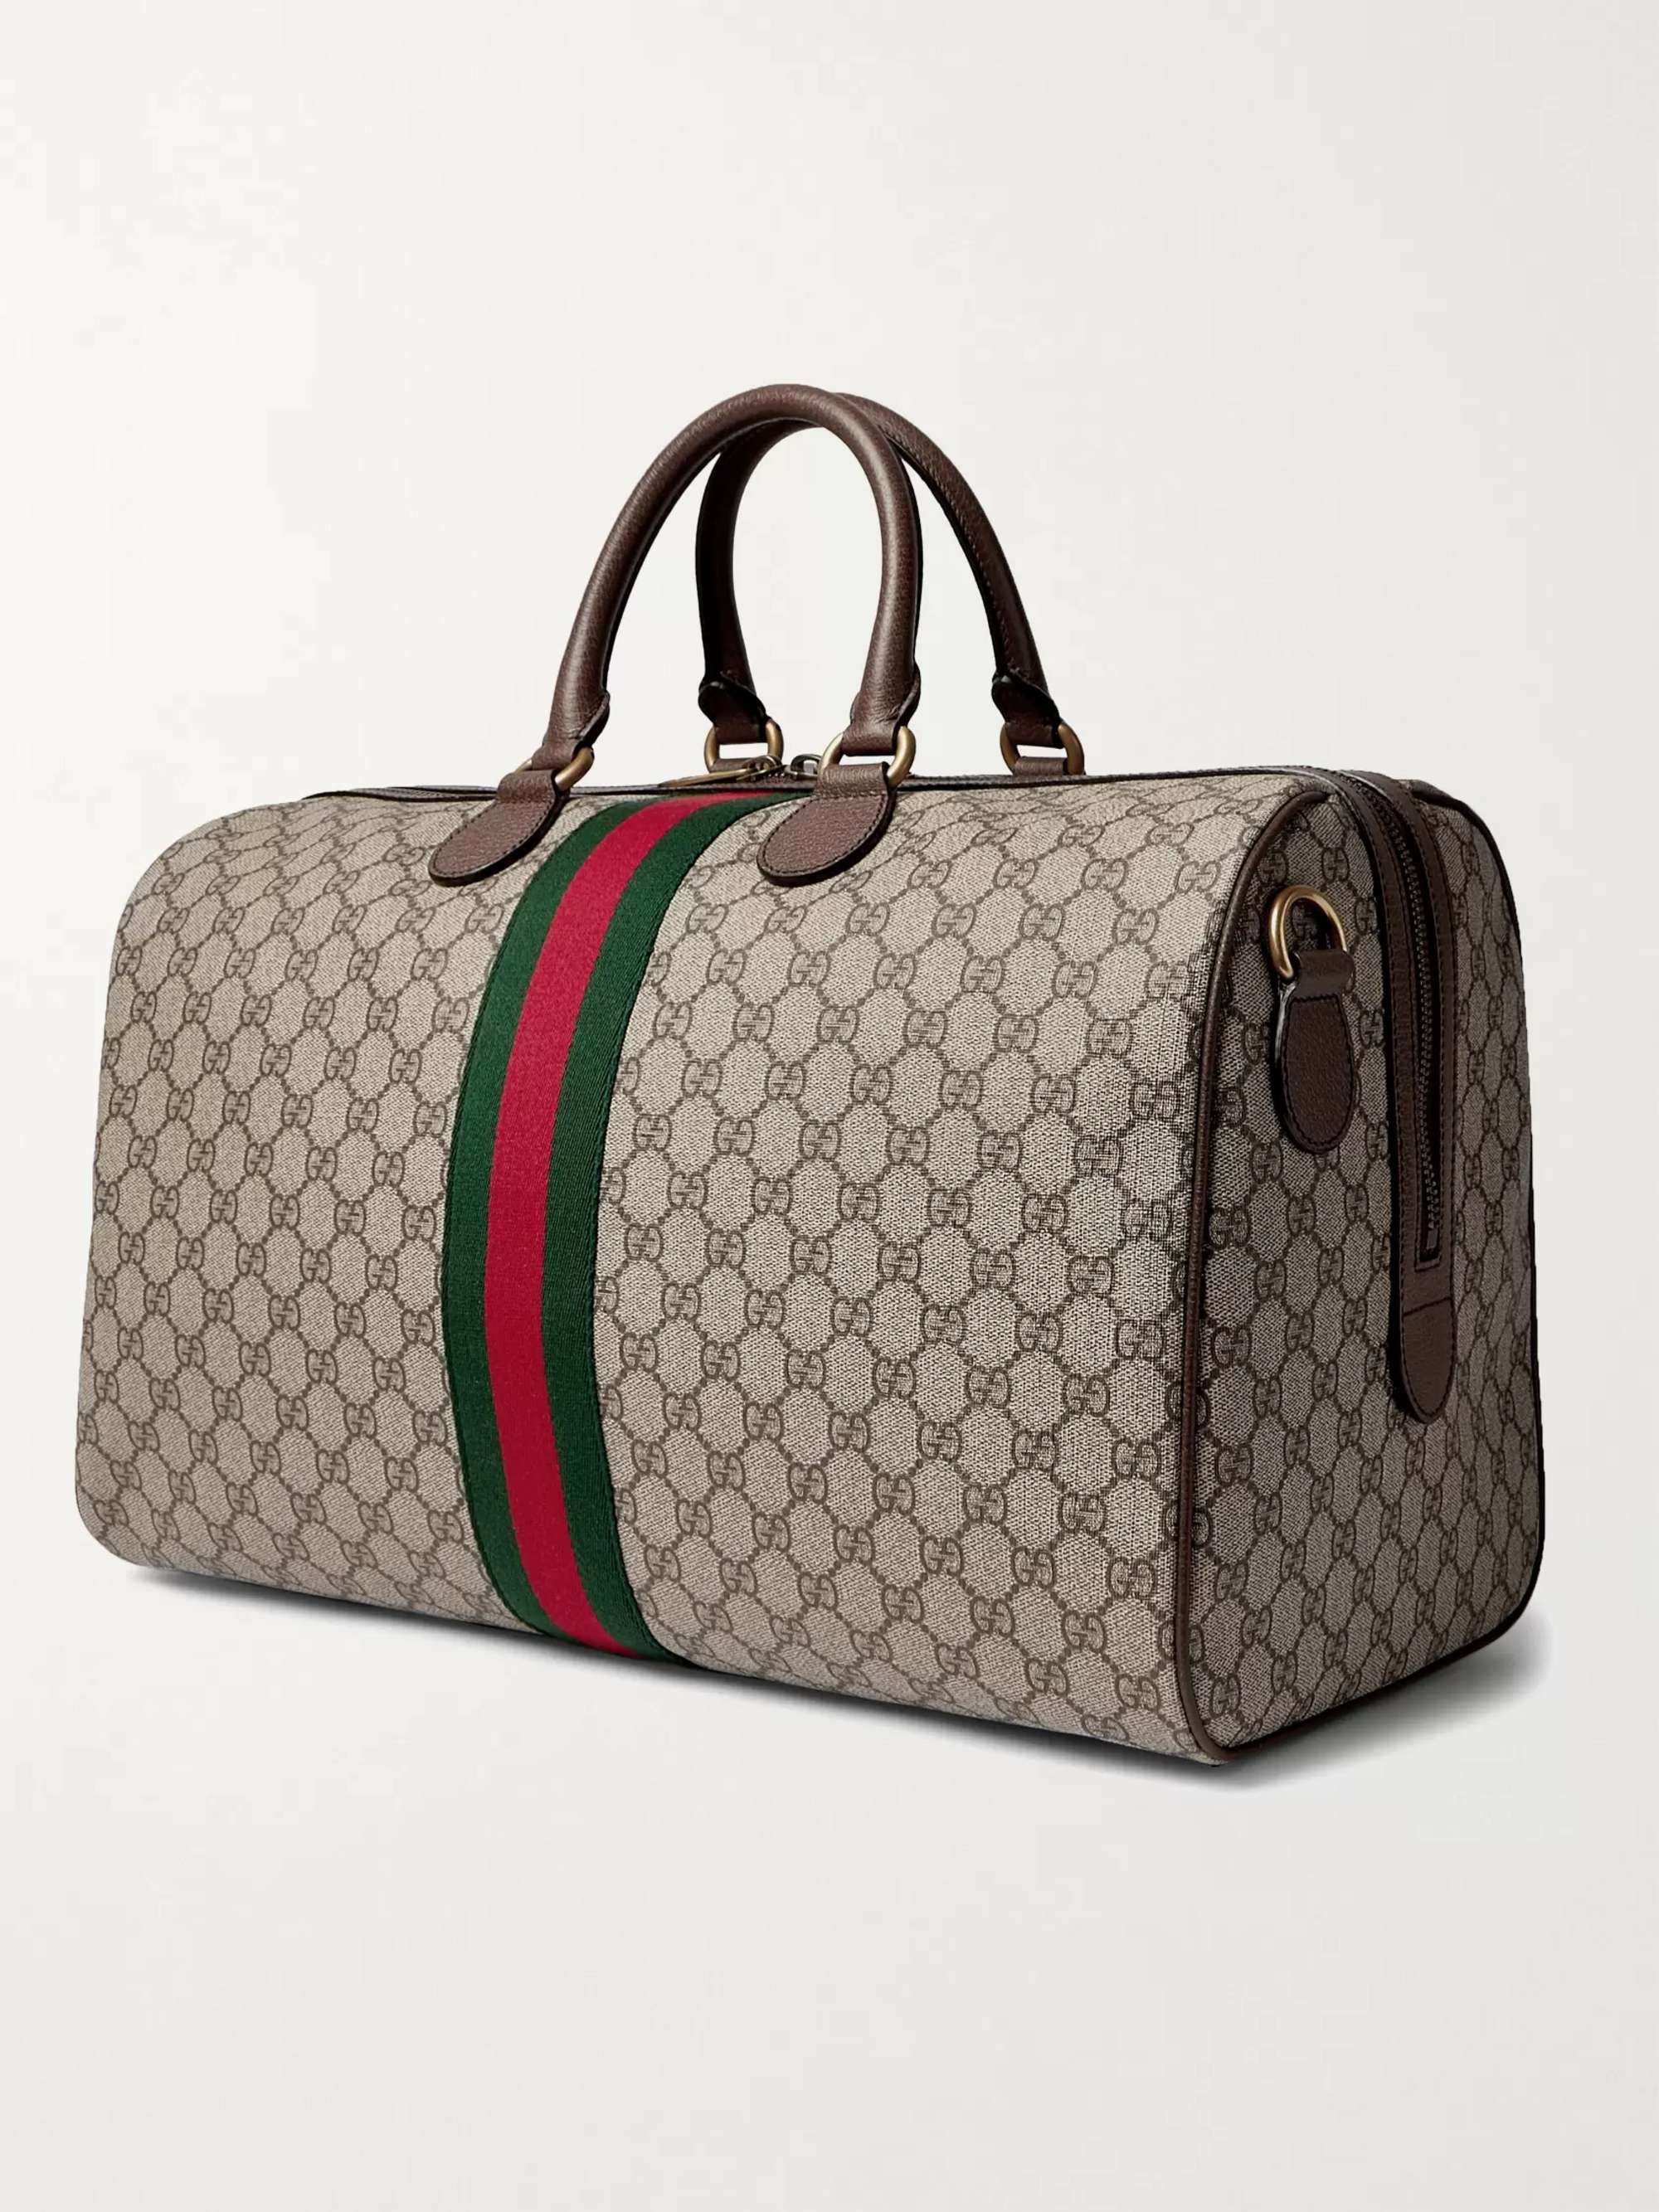 GUCCI Ophidia Leather and Webbing-Trimmed Monogrammed Coated-Canvas Duffle Bag